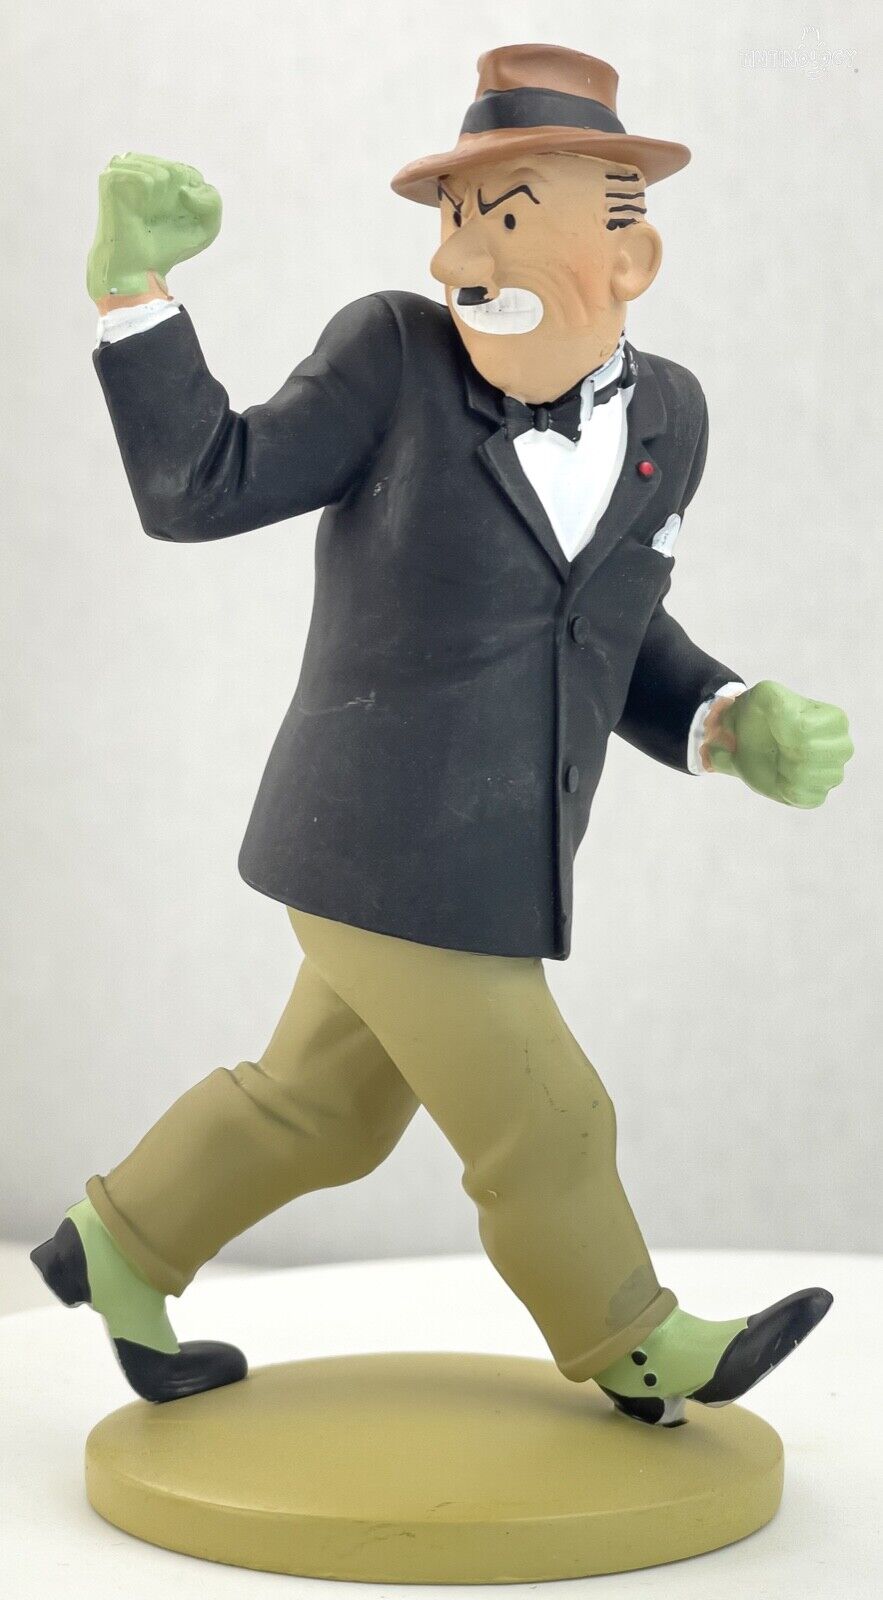 Tintin Figurines Officielle # 63 Gibbons from Blue Lotus model ML resin Figure